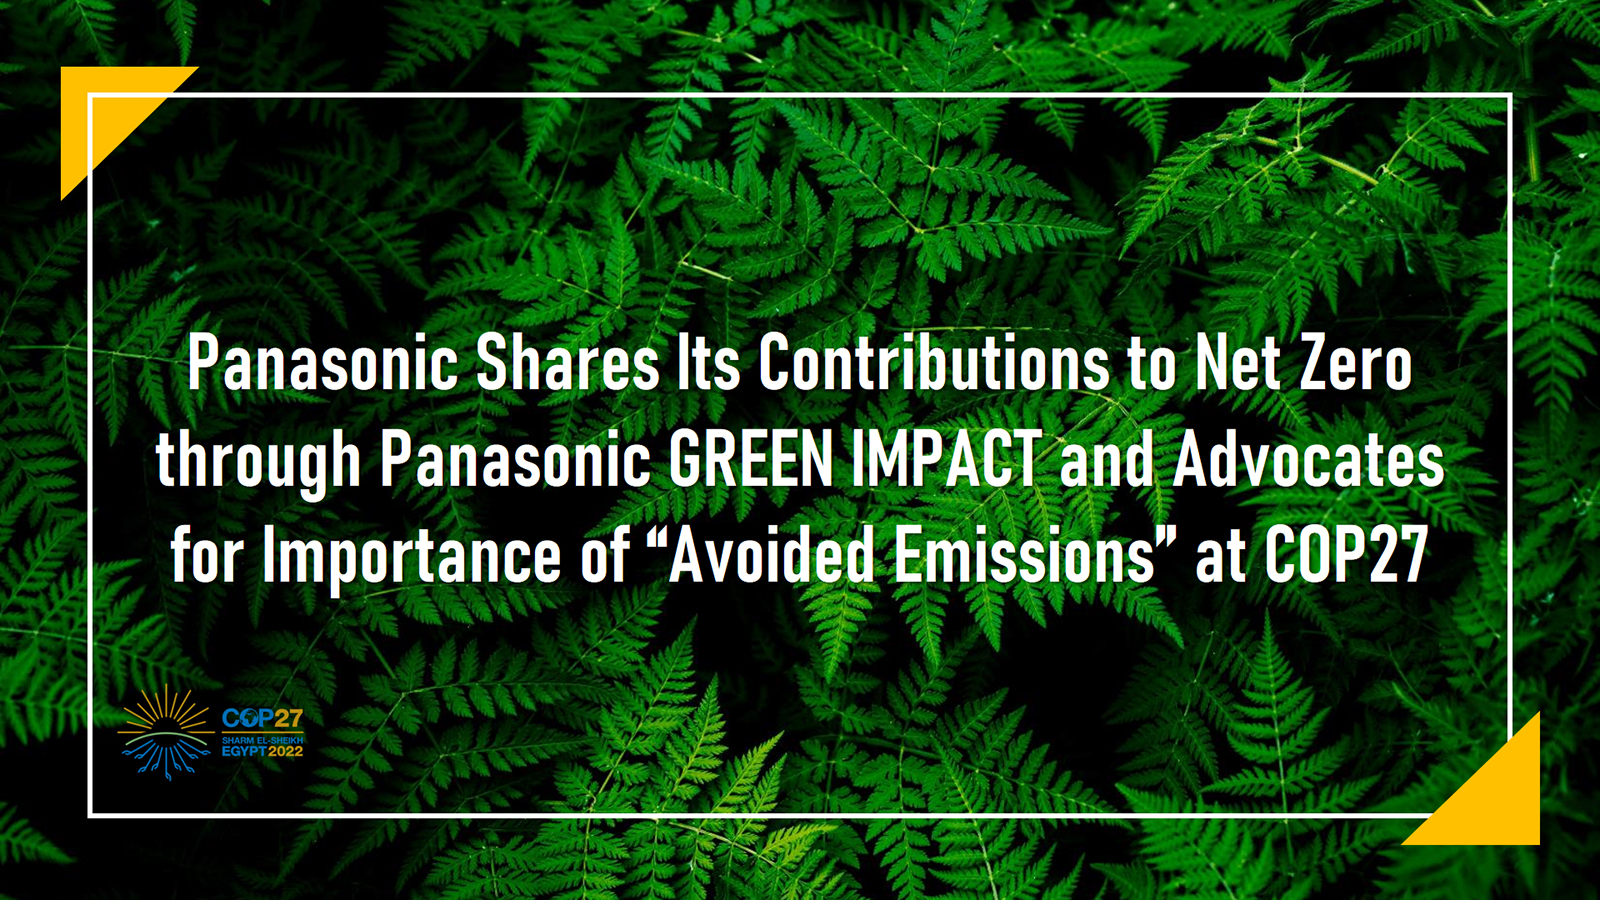 Panasonic Shares Its Contributions to Net Zero through Panasonic GREEN IMPACT and Advocates for Importance of “Avoided Emissions” at COP27